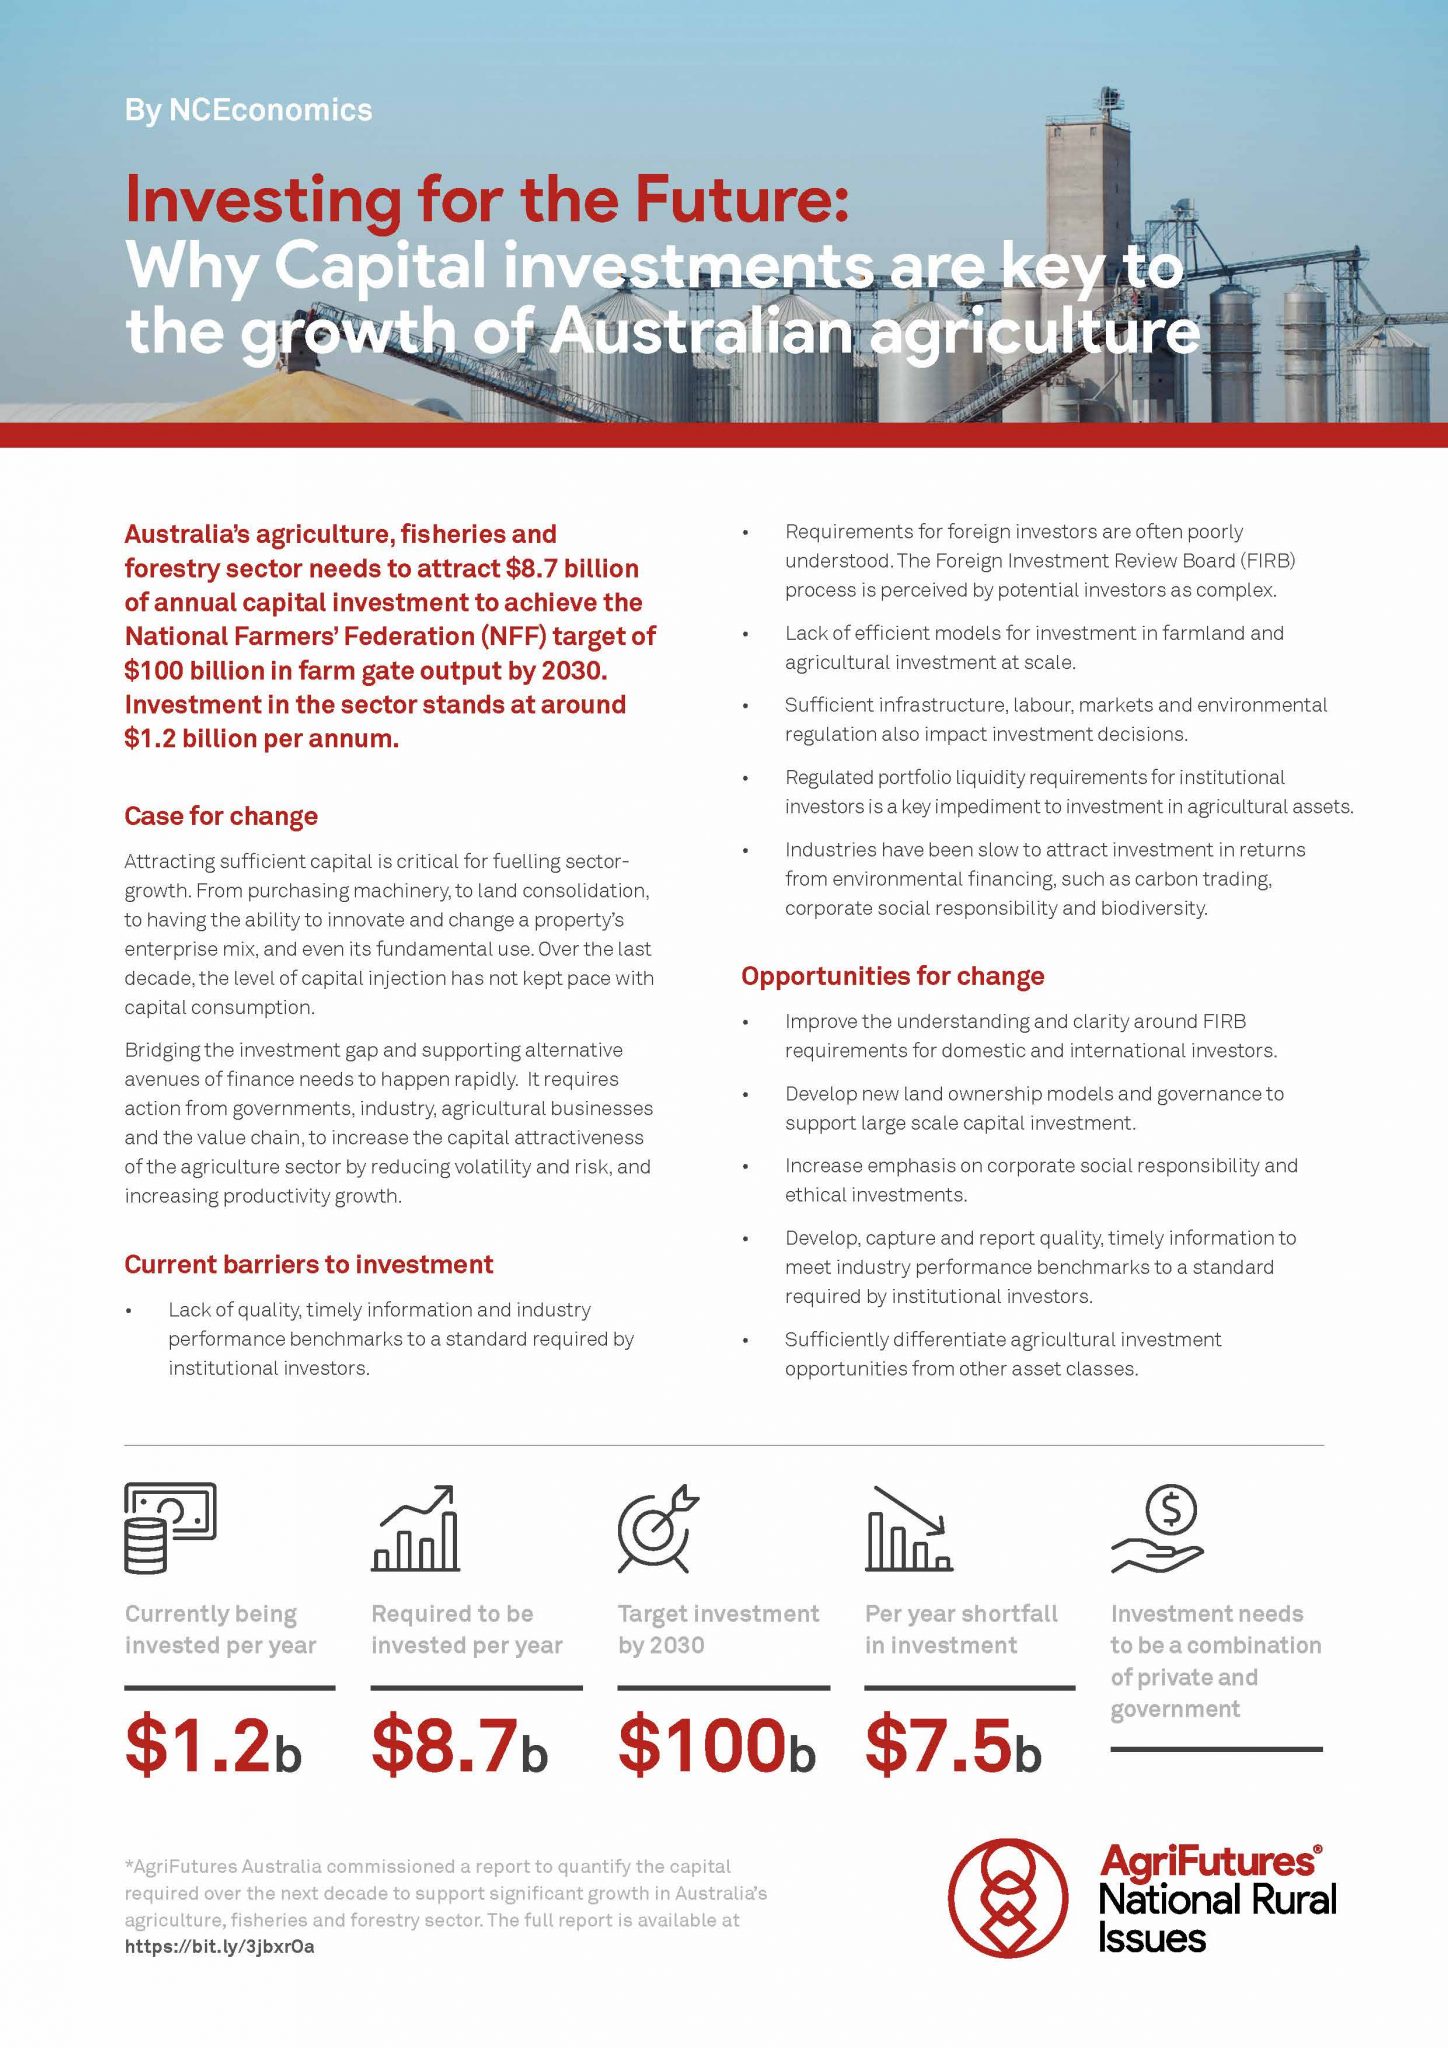 Fact sheet: Investing for the Future - Why Capital investments are key to the growth of Australian agriculture - image